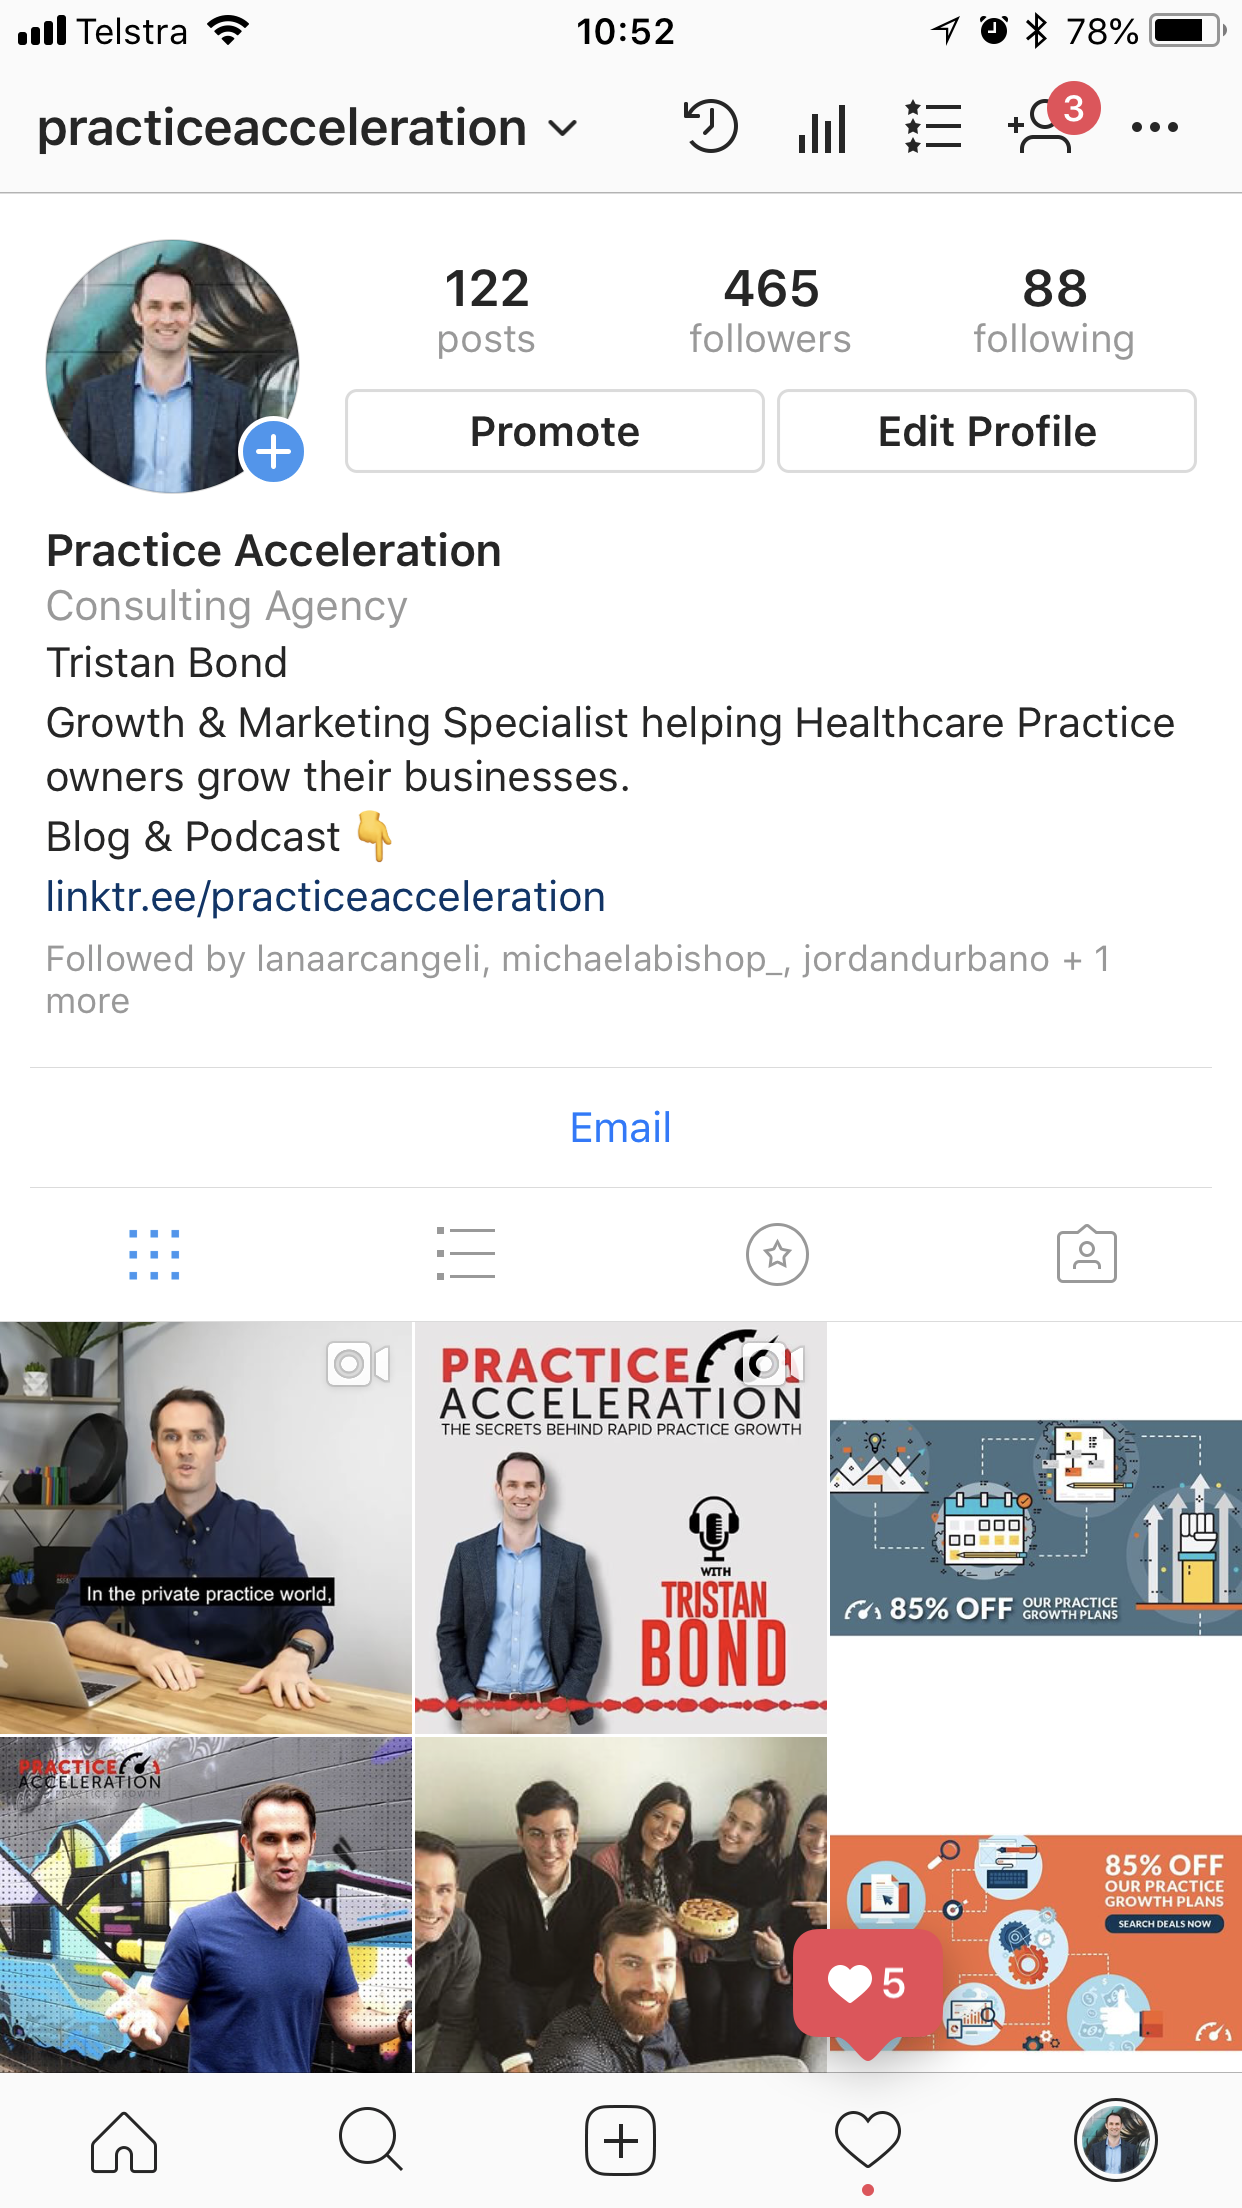 How You Can Use Instagram to Attract Patients to Your Practice